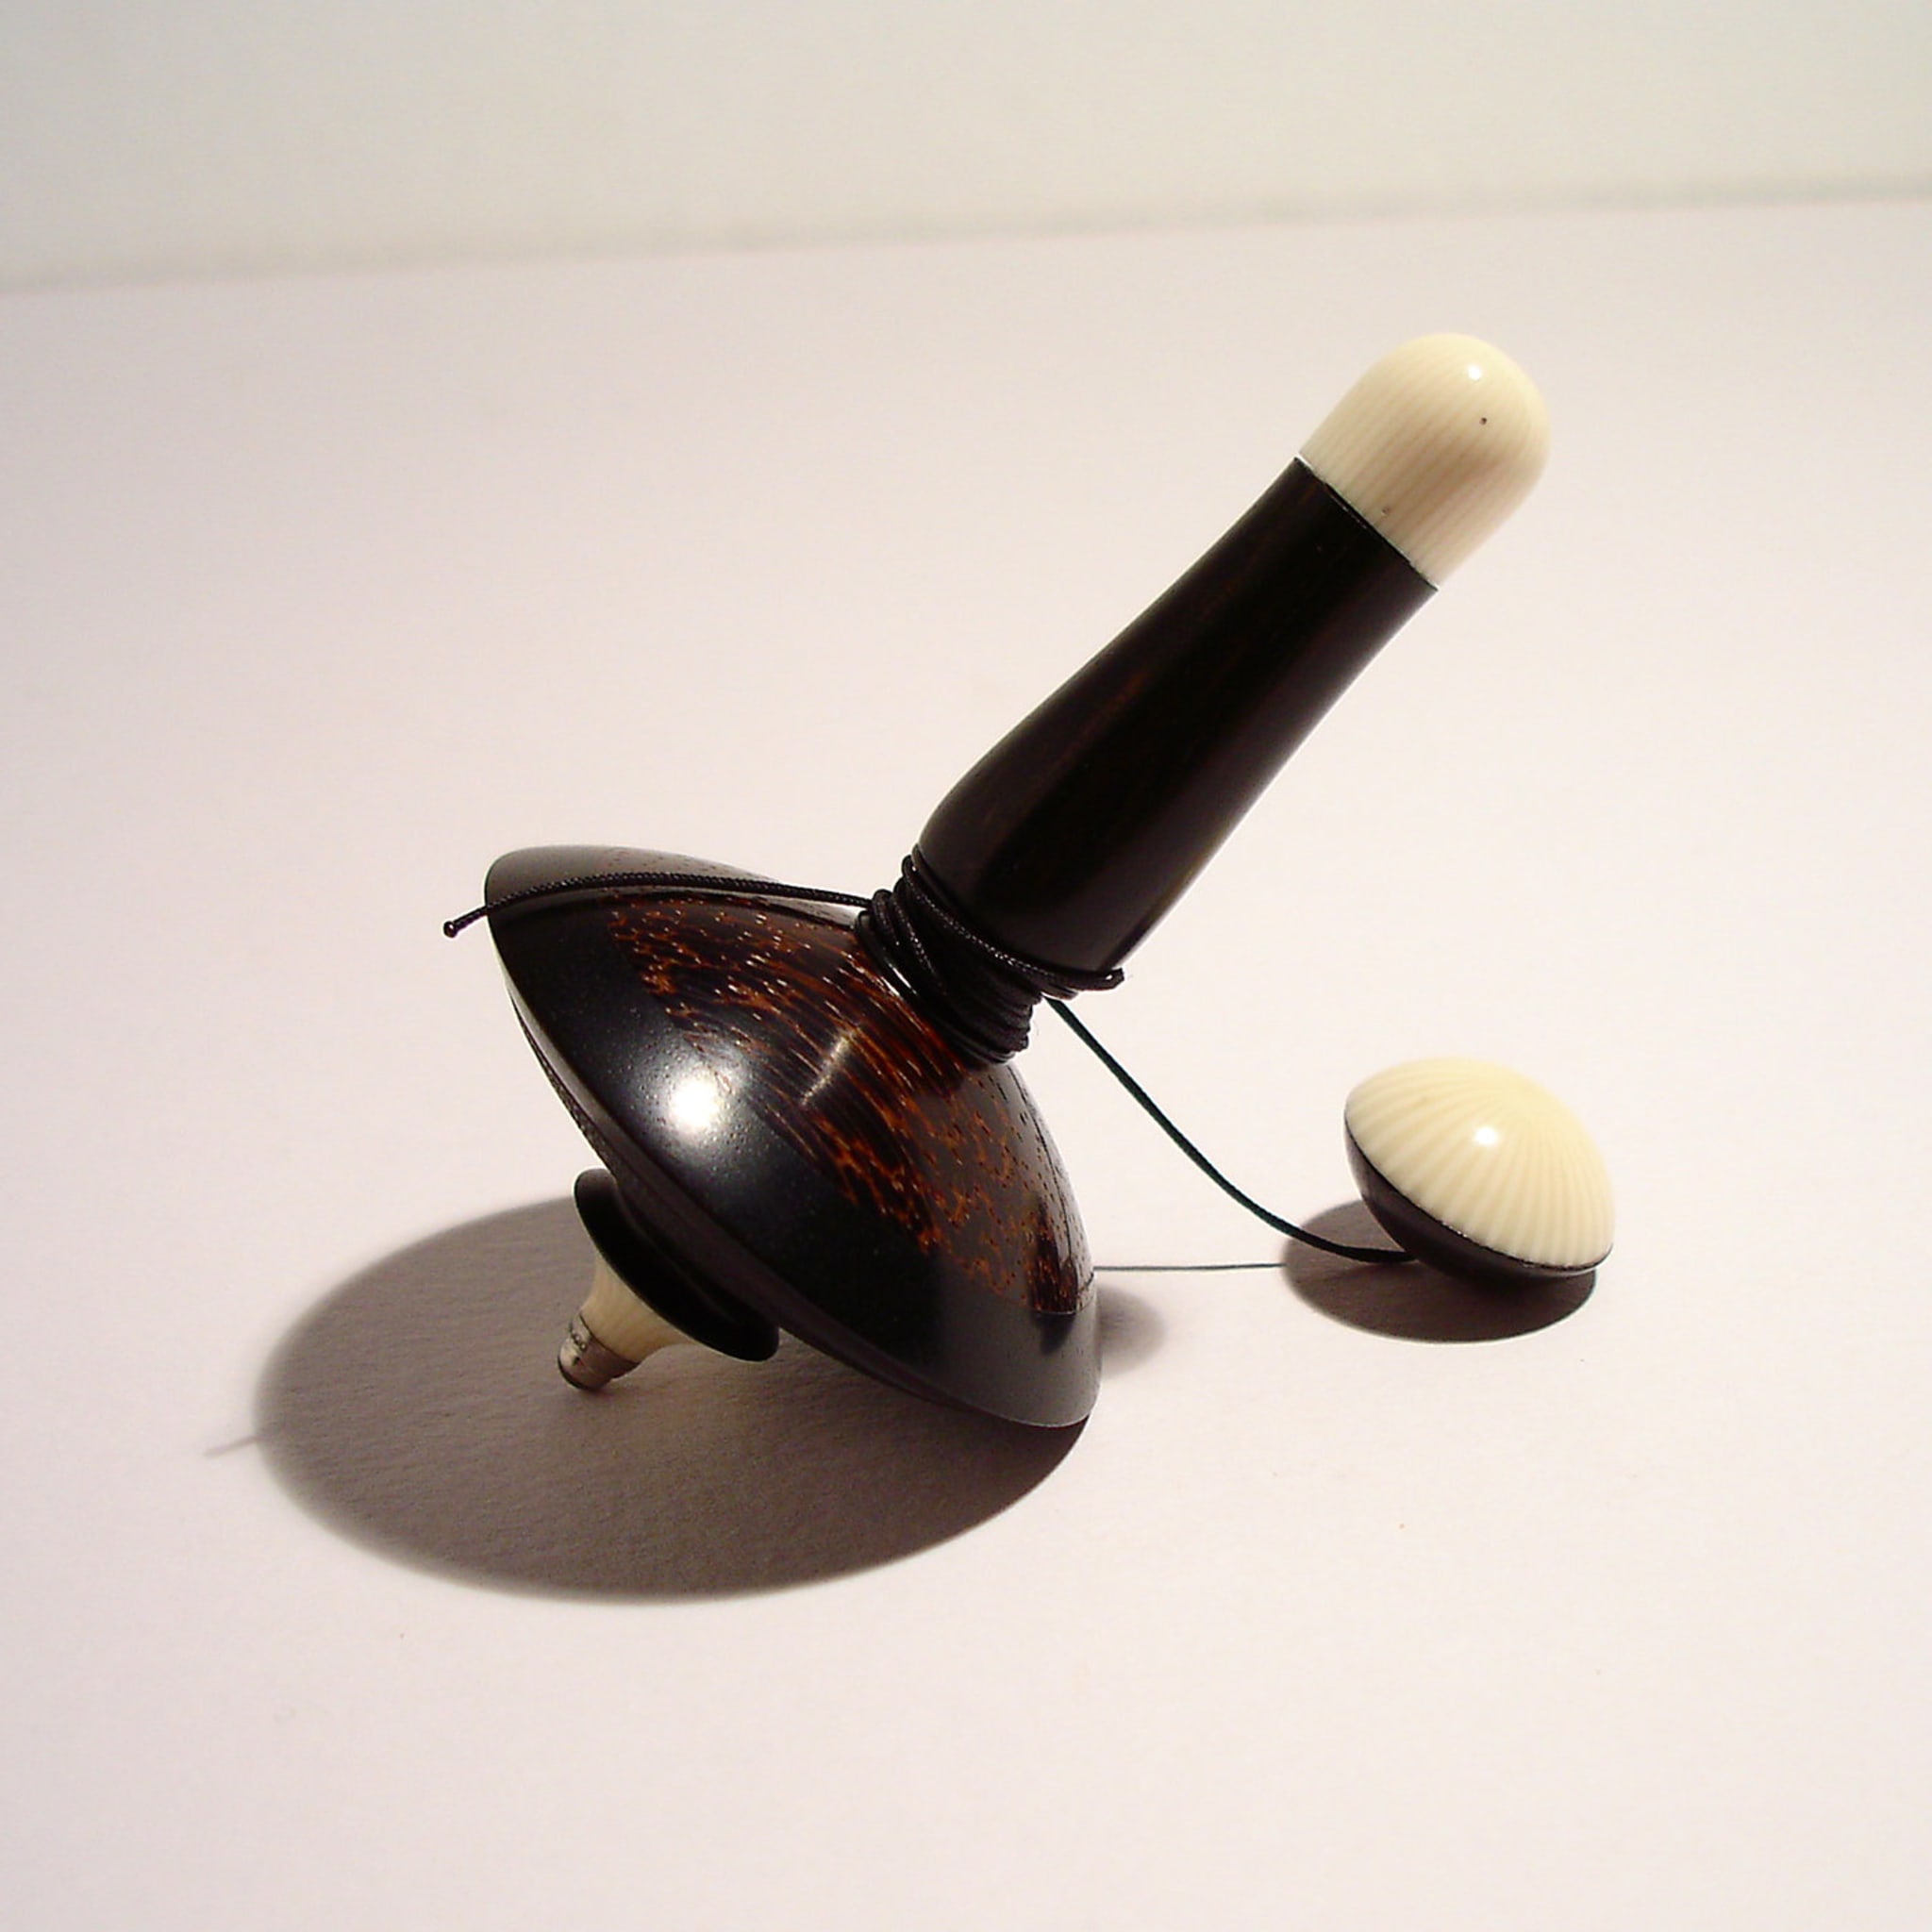 Filo Spinning Top in Ebony, Galalith and Black Palm - Alternative view 1